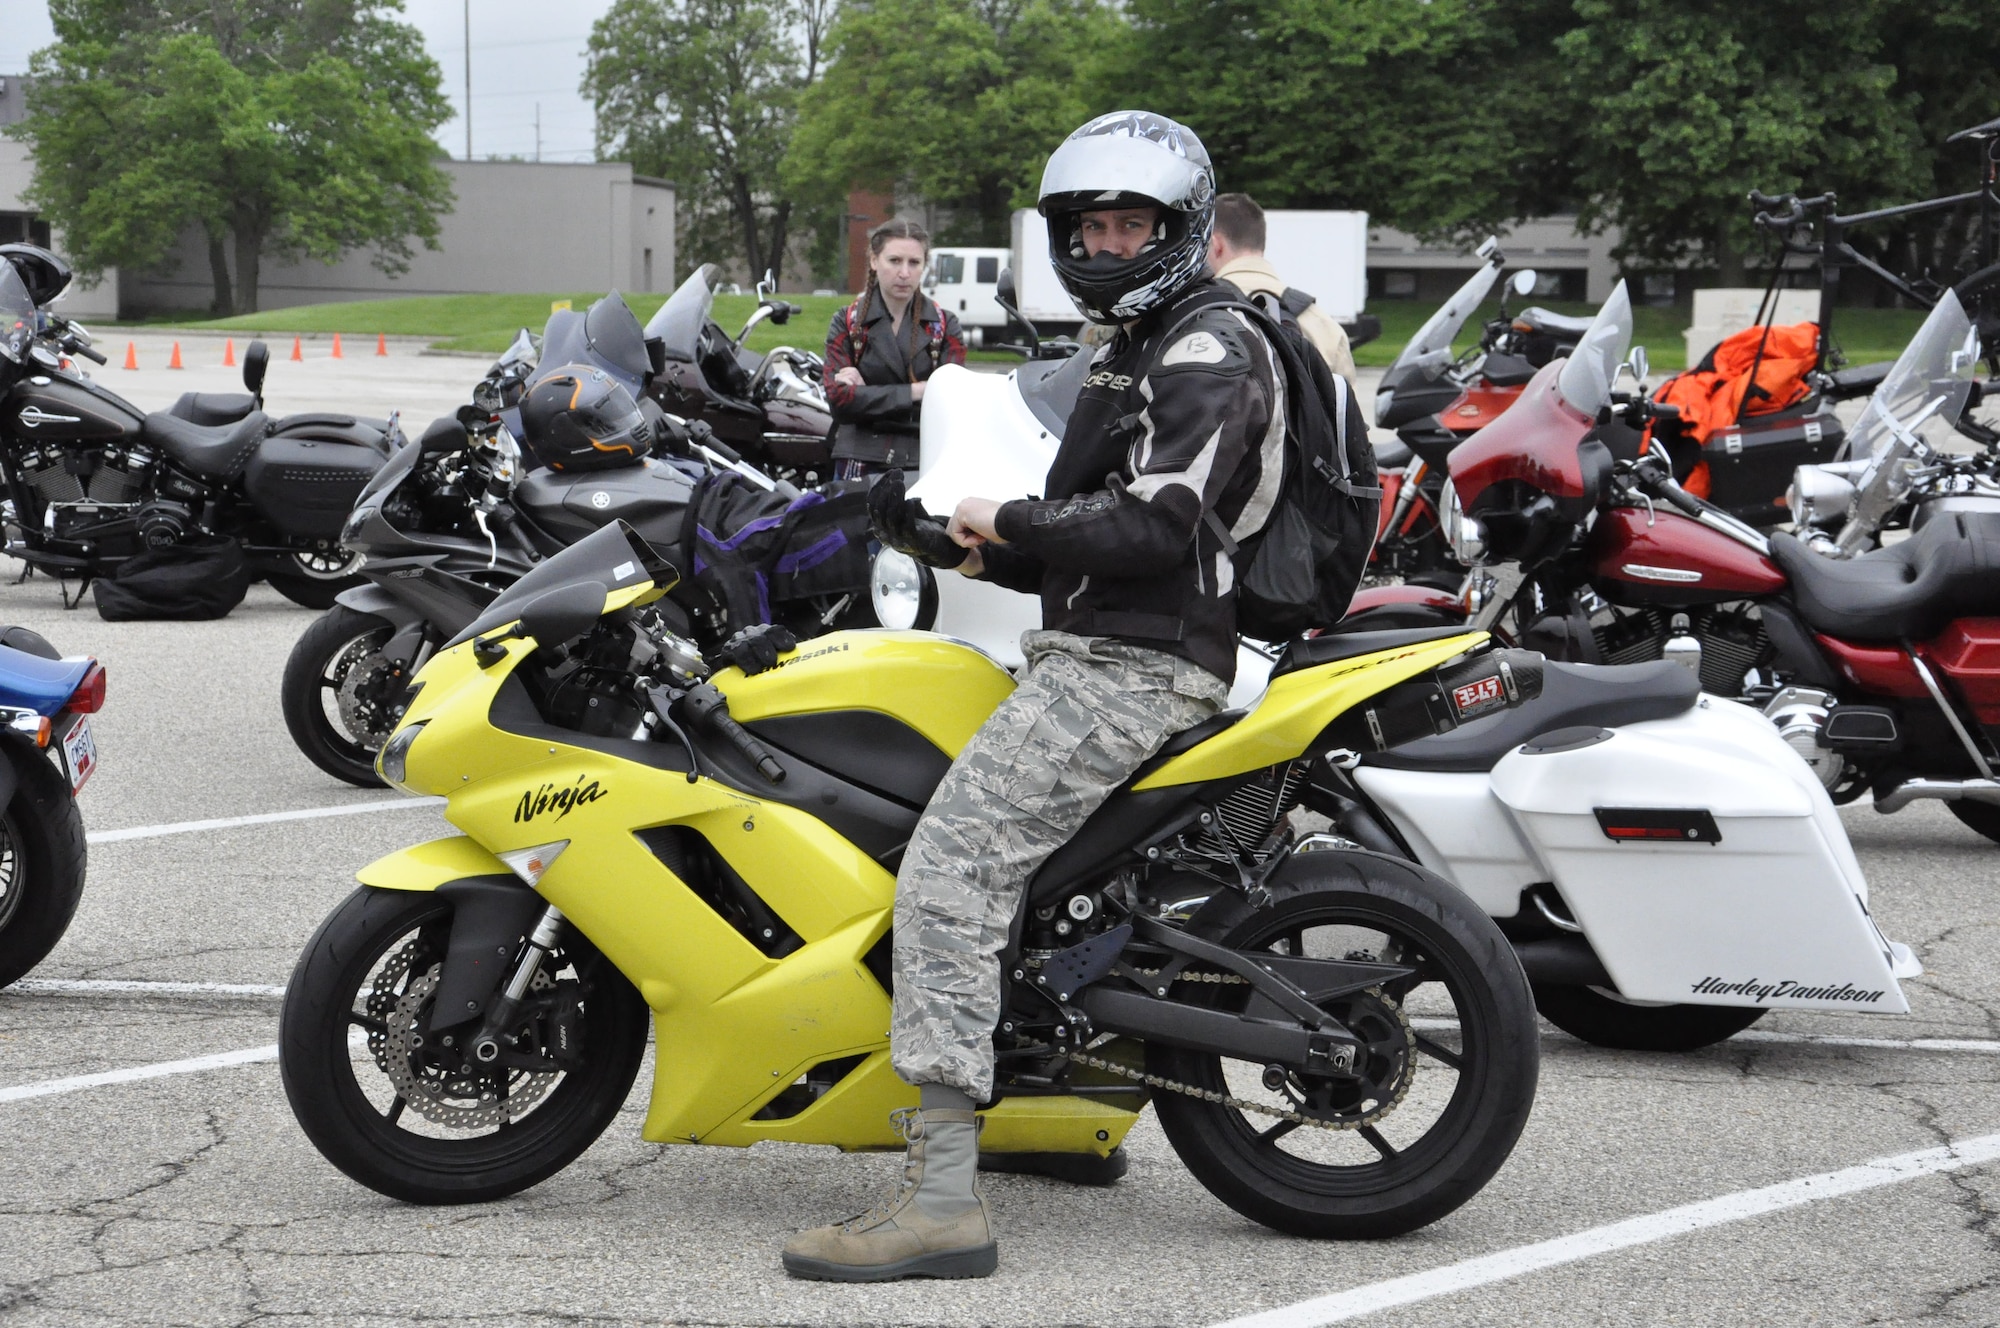 Capt Ryan Watson pulls on his safety gloves and gets ready before he prepares to participate in the group mentorship ride May 10.